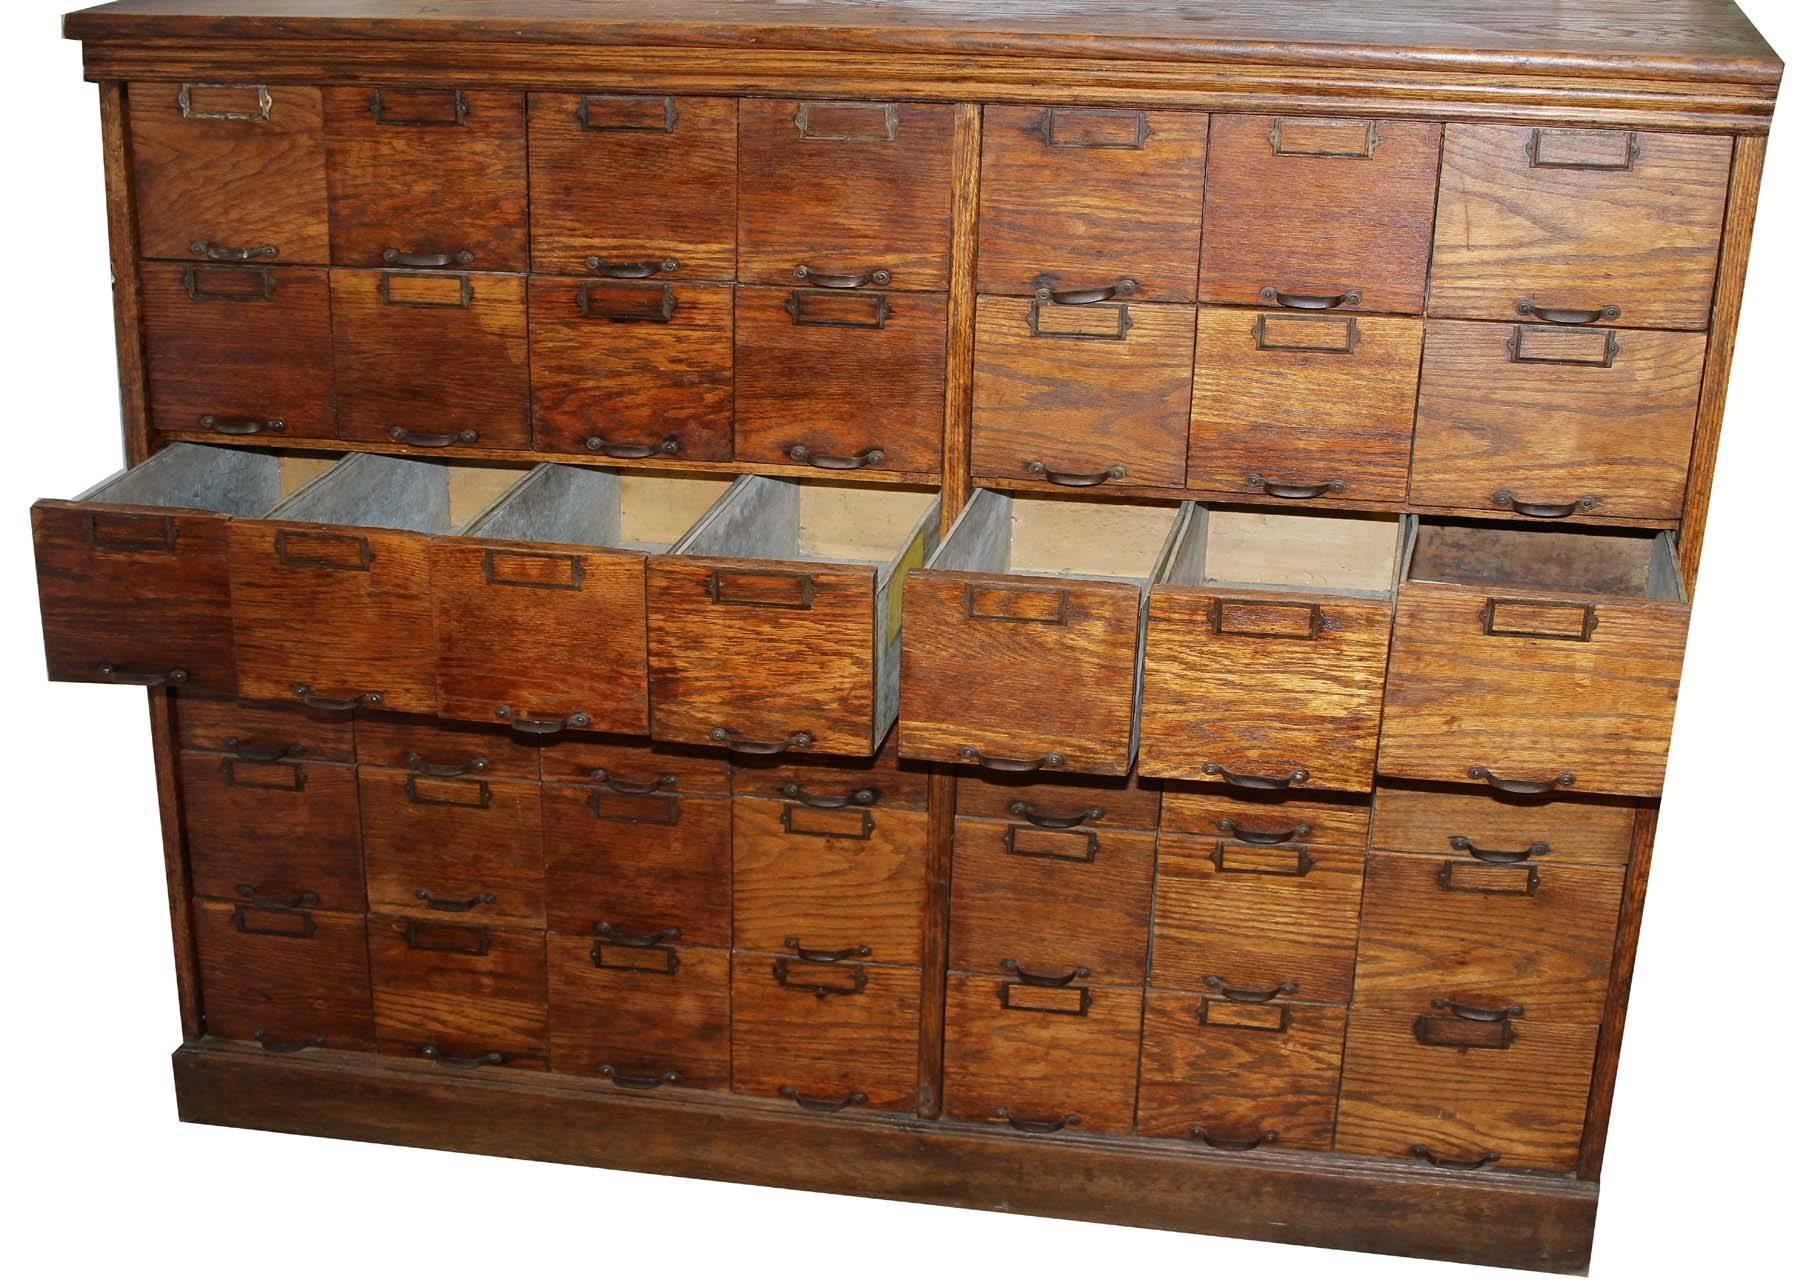 This item was originally used to store seeds for sale at an old country store. Tin lined drawers and oak drawer front. All original fixtures including the caption brackets for description cards to be inserted for easy identification of each drawer.